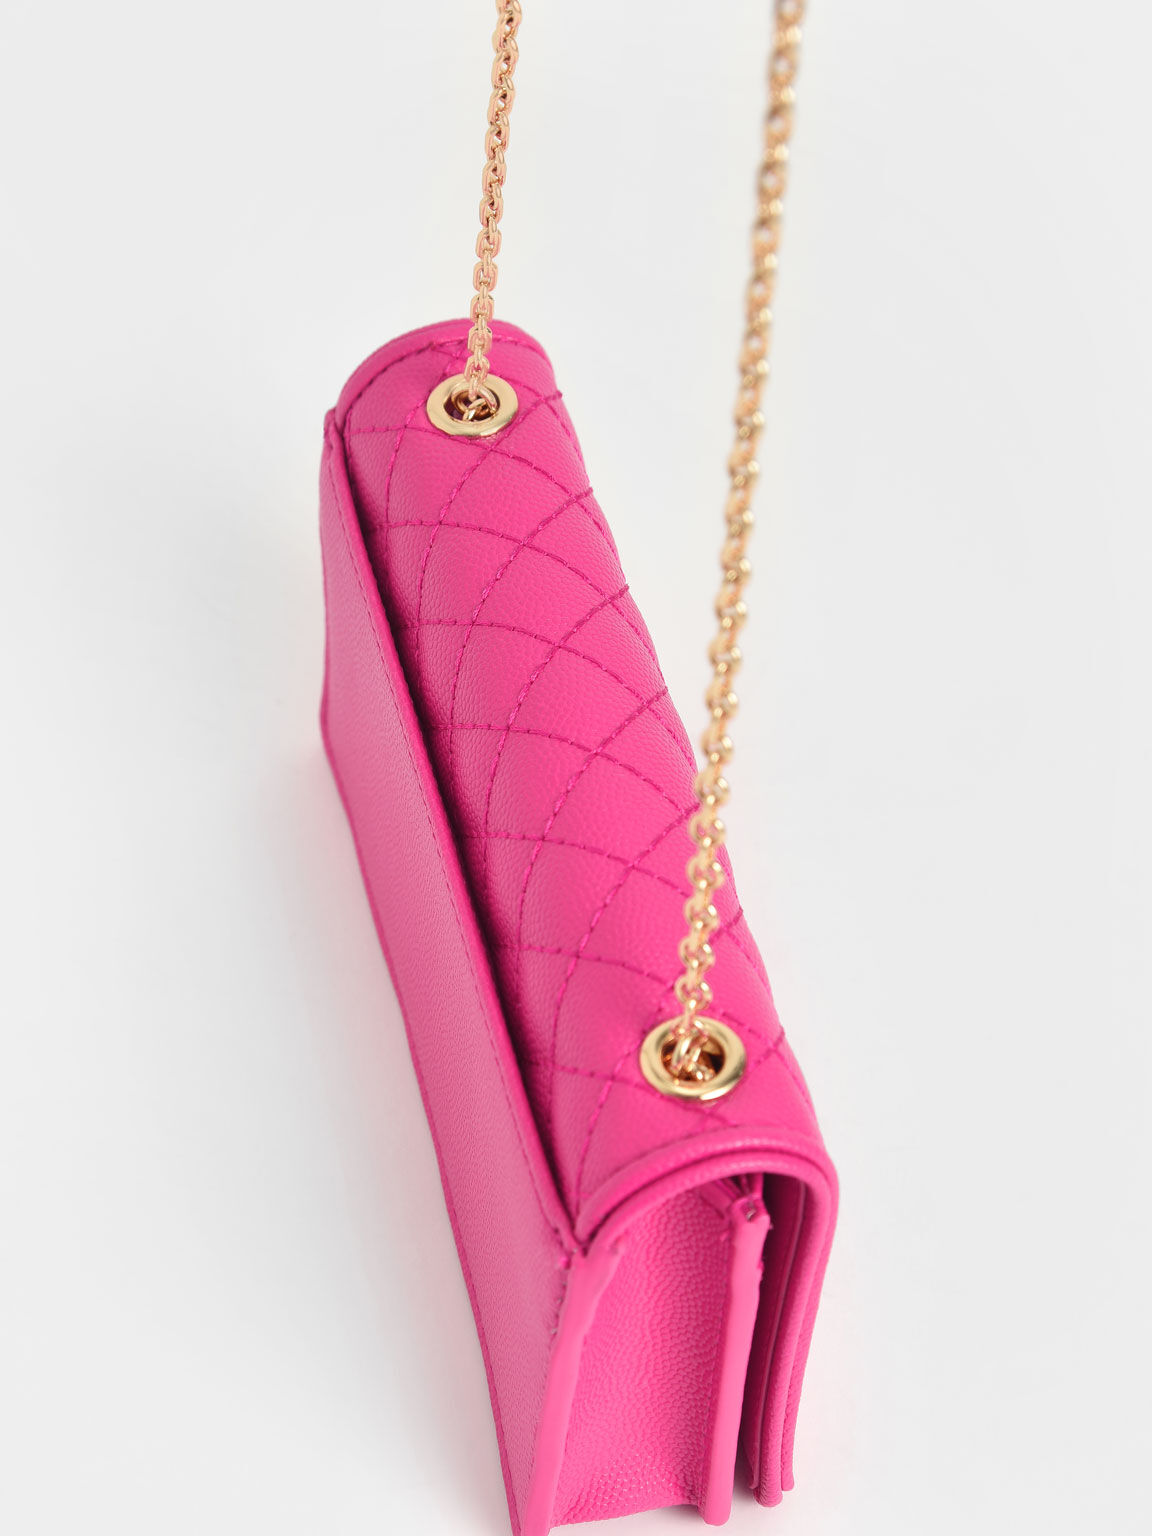 Quilted Pouch, Fuchsia, hi-res